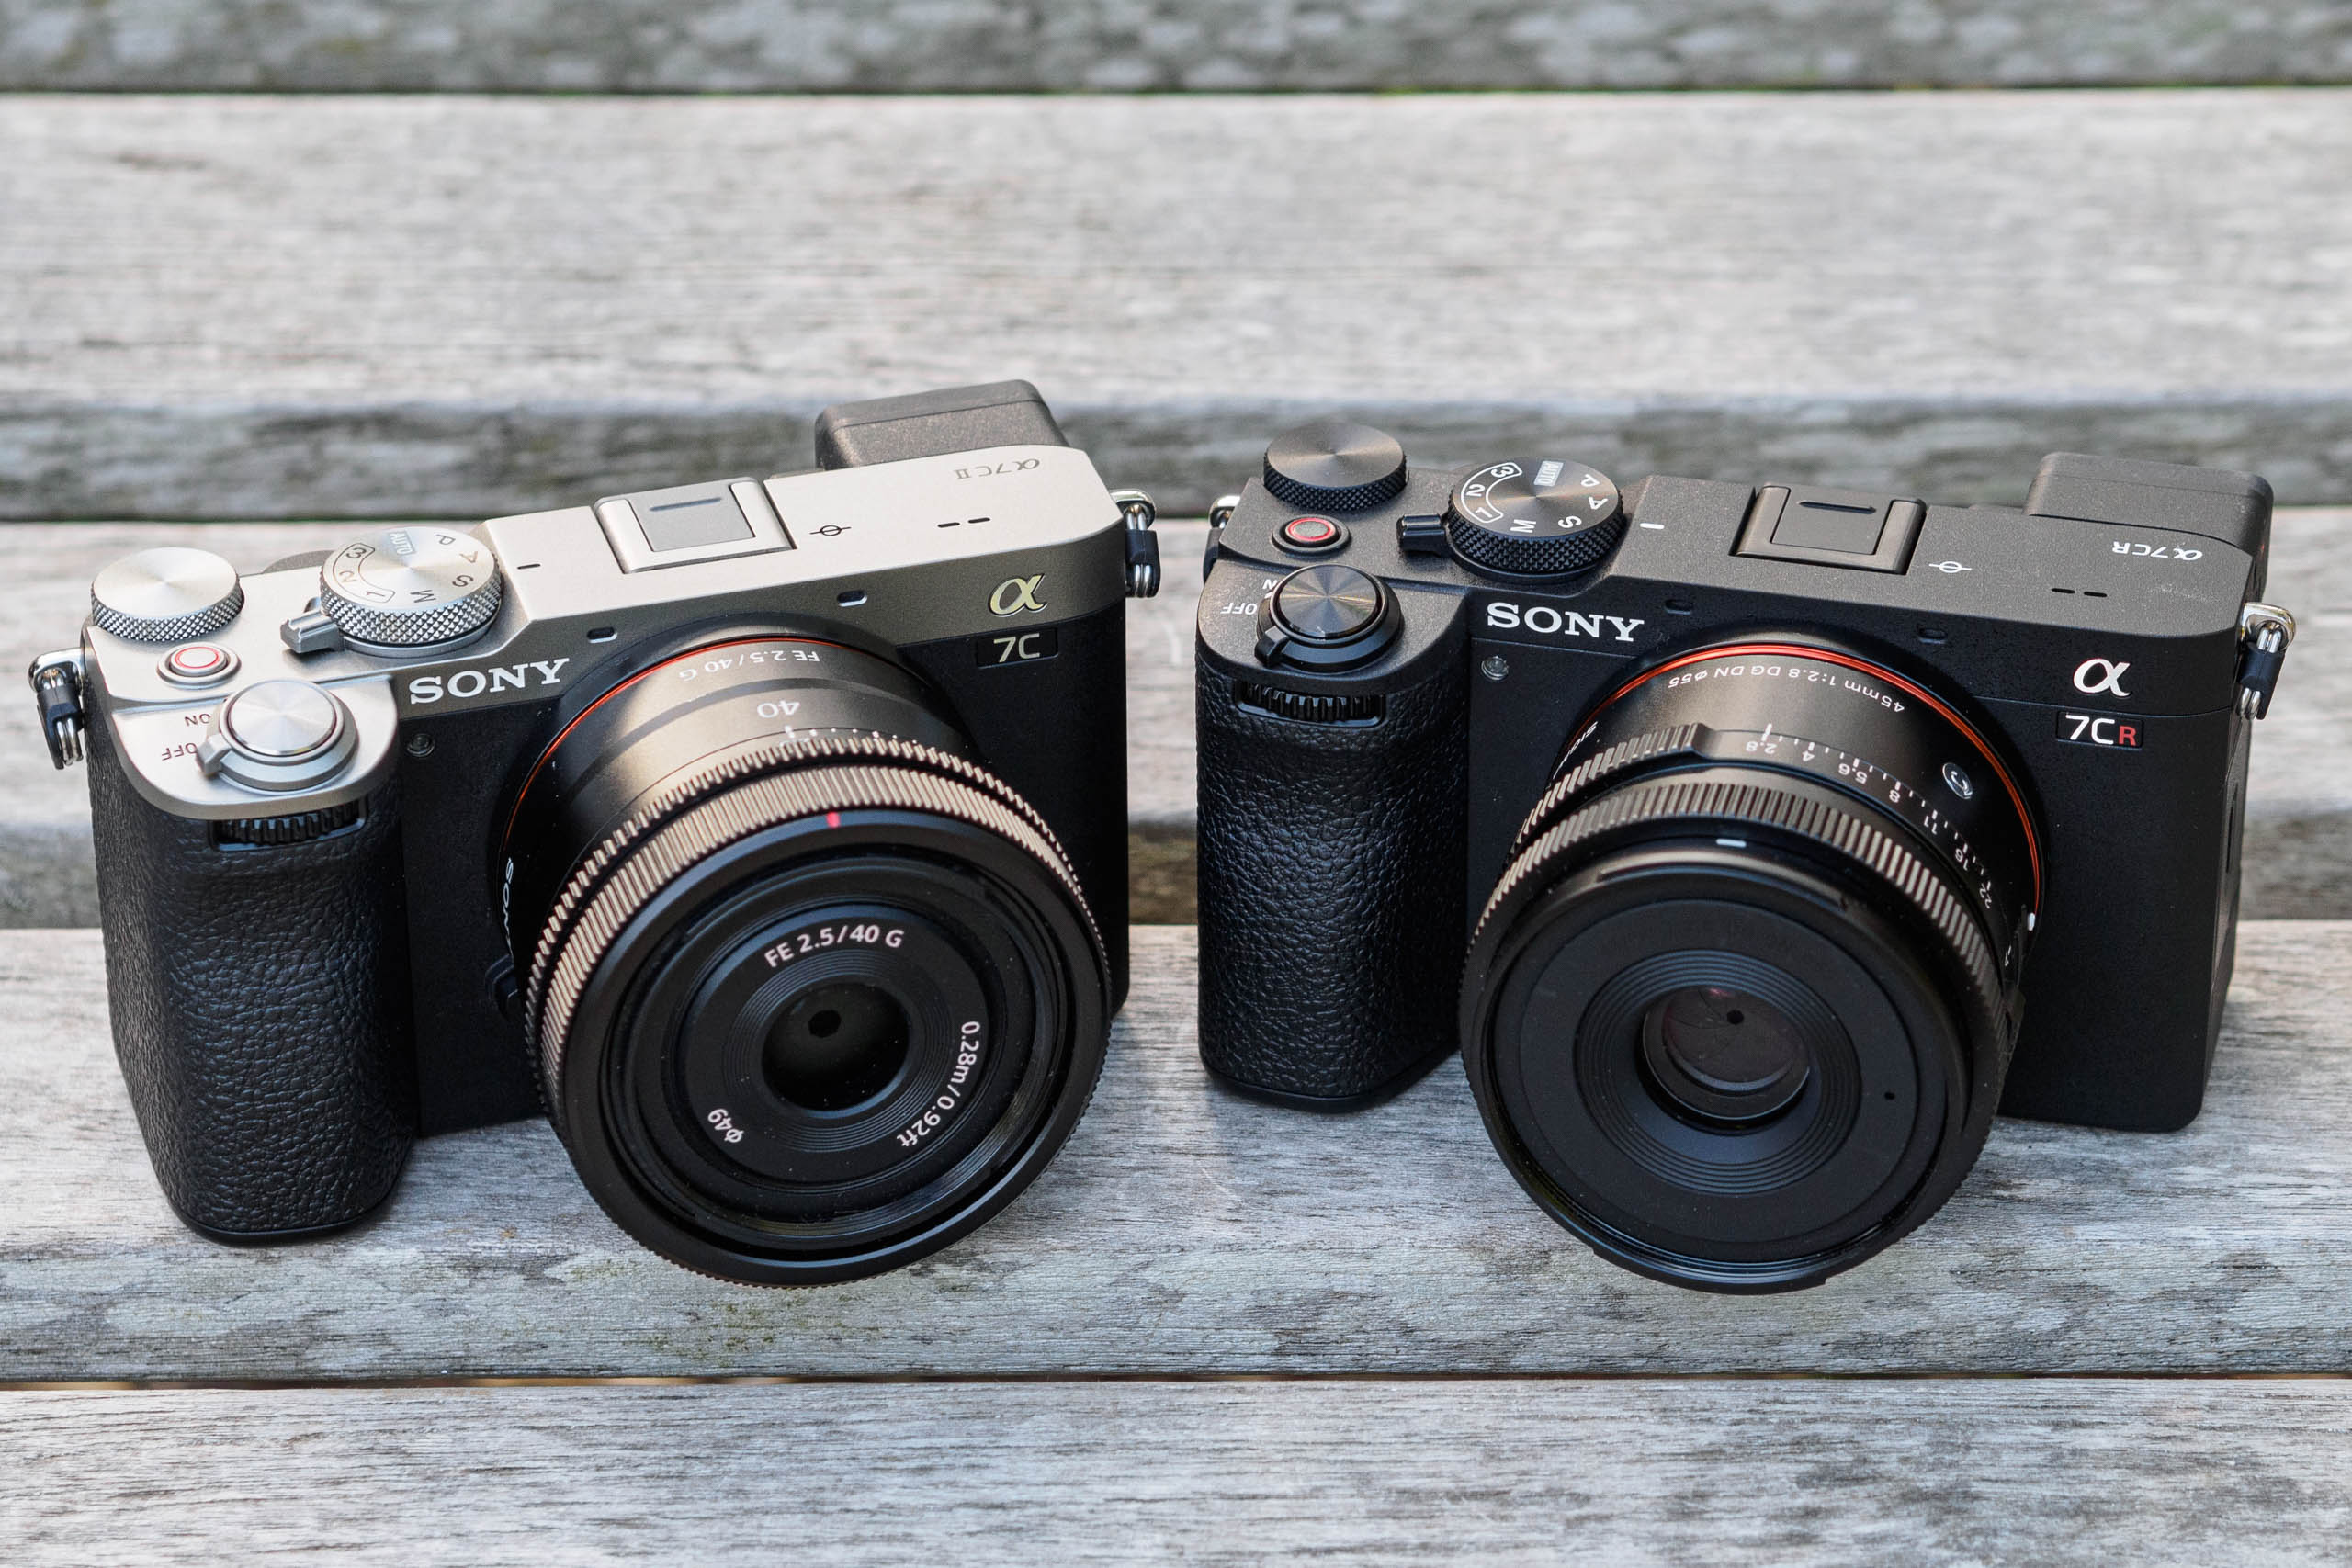 Sony a7C II and a7CR Cameras are Compact, AI-Powered, and